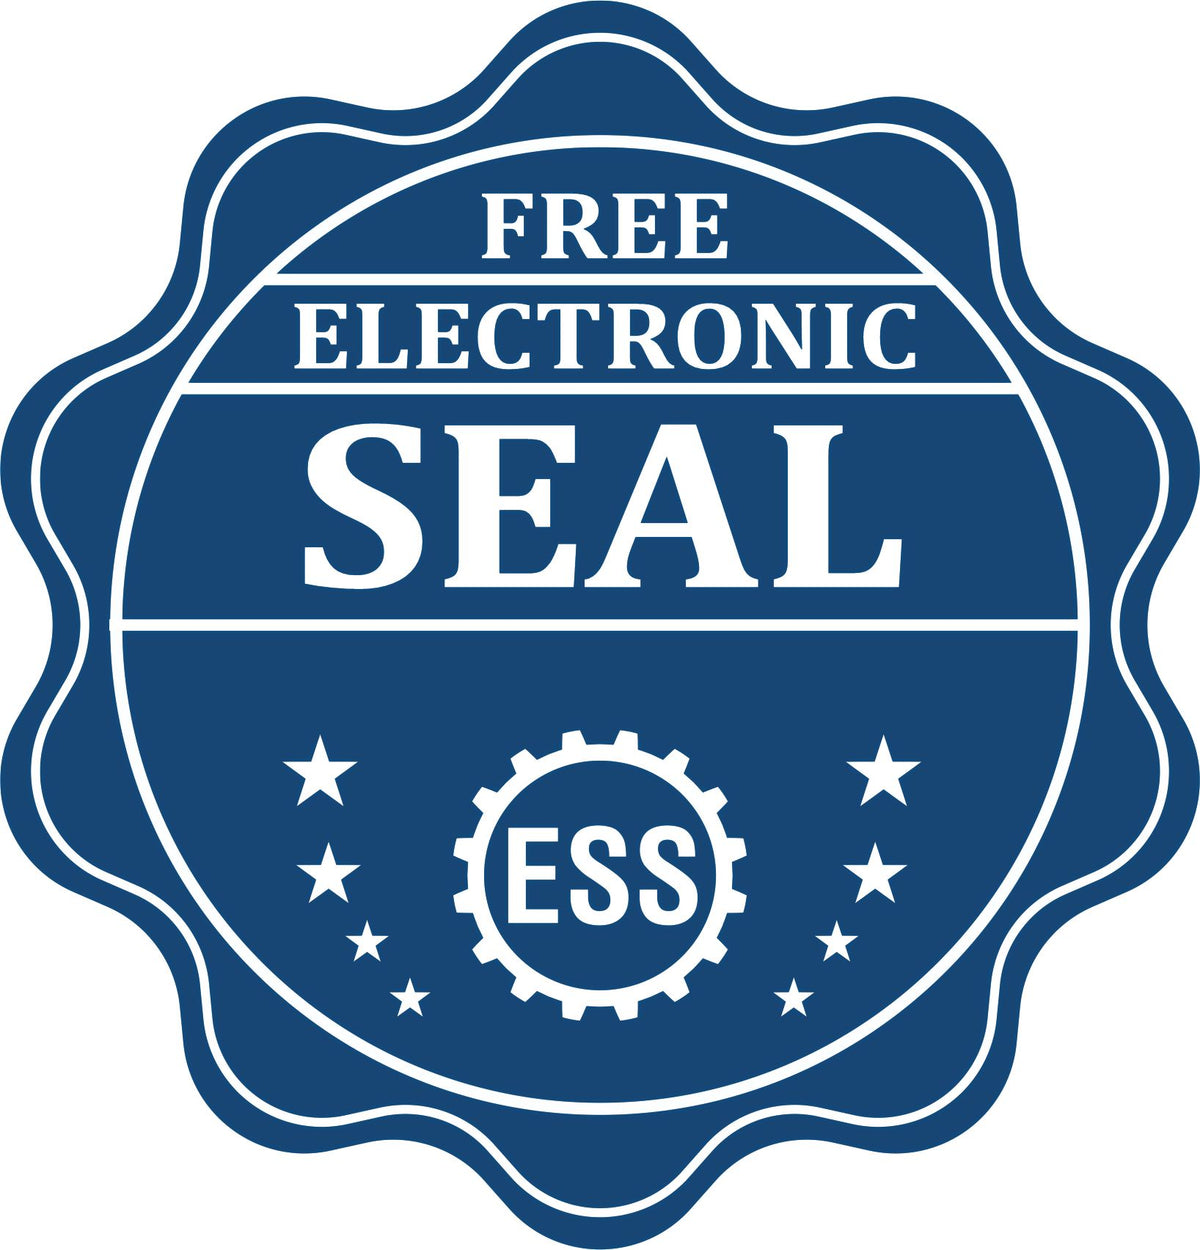 A badge showing a free electronic seal for the Heavy Duty Cast Iron Alabama Land Surveyor Seal Embosser with stars and the ESS gear on the emblem.